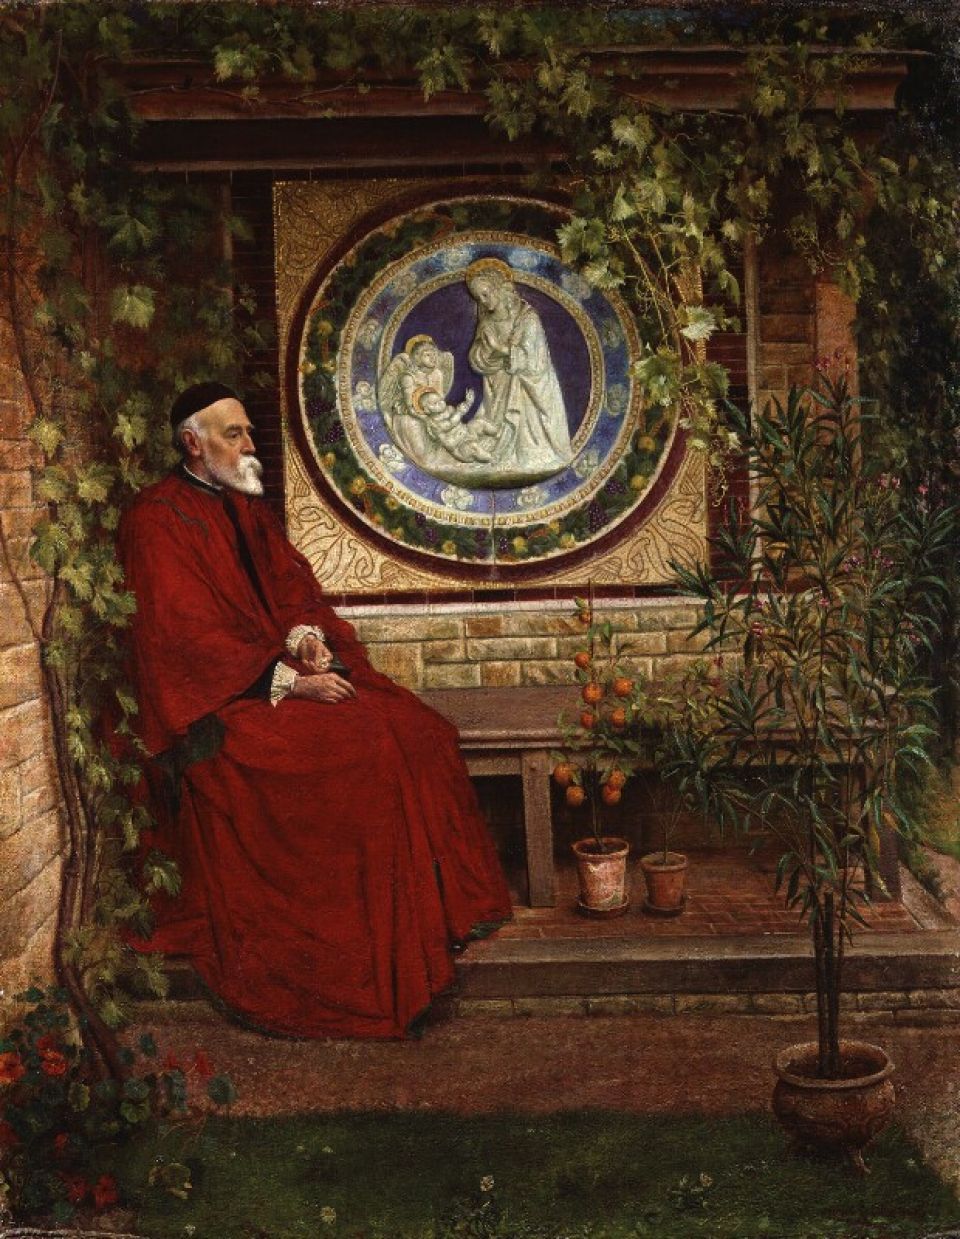 Louis Reid Deuchars, George Frederic Watts, after a photograph by George Andrews, 1899, oil on canvas, NPG 5223

© National Portrait Gallery